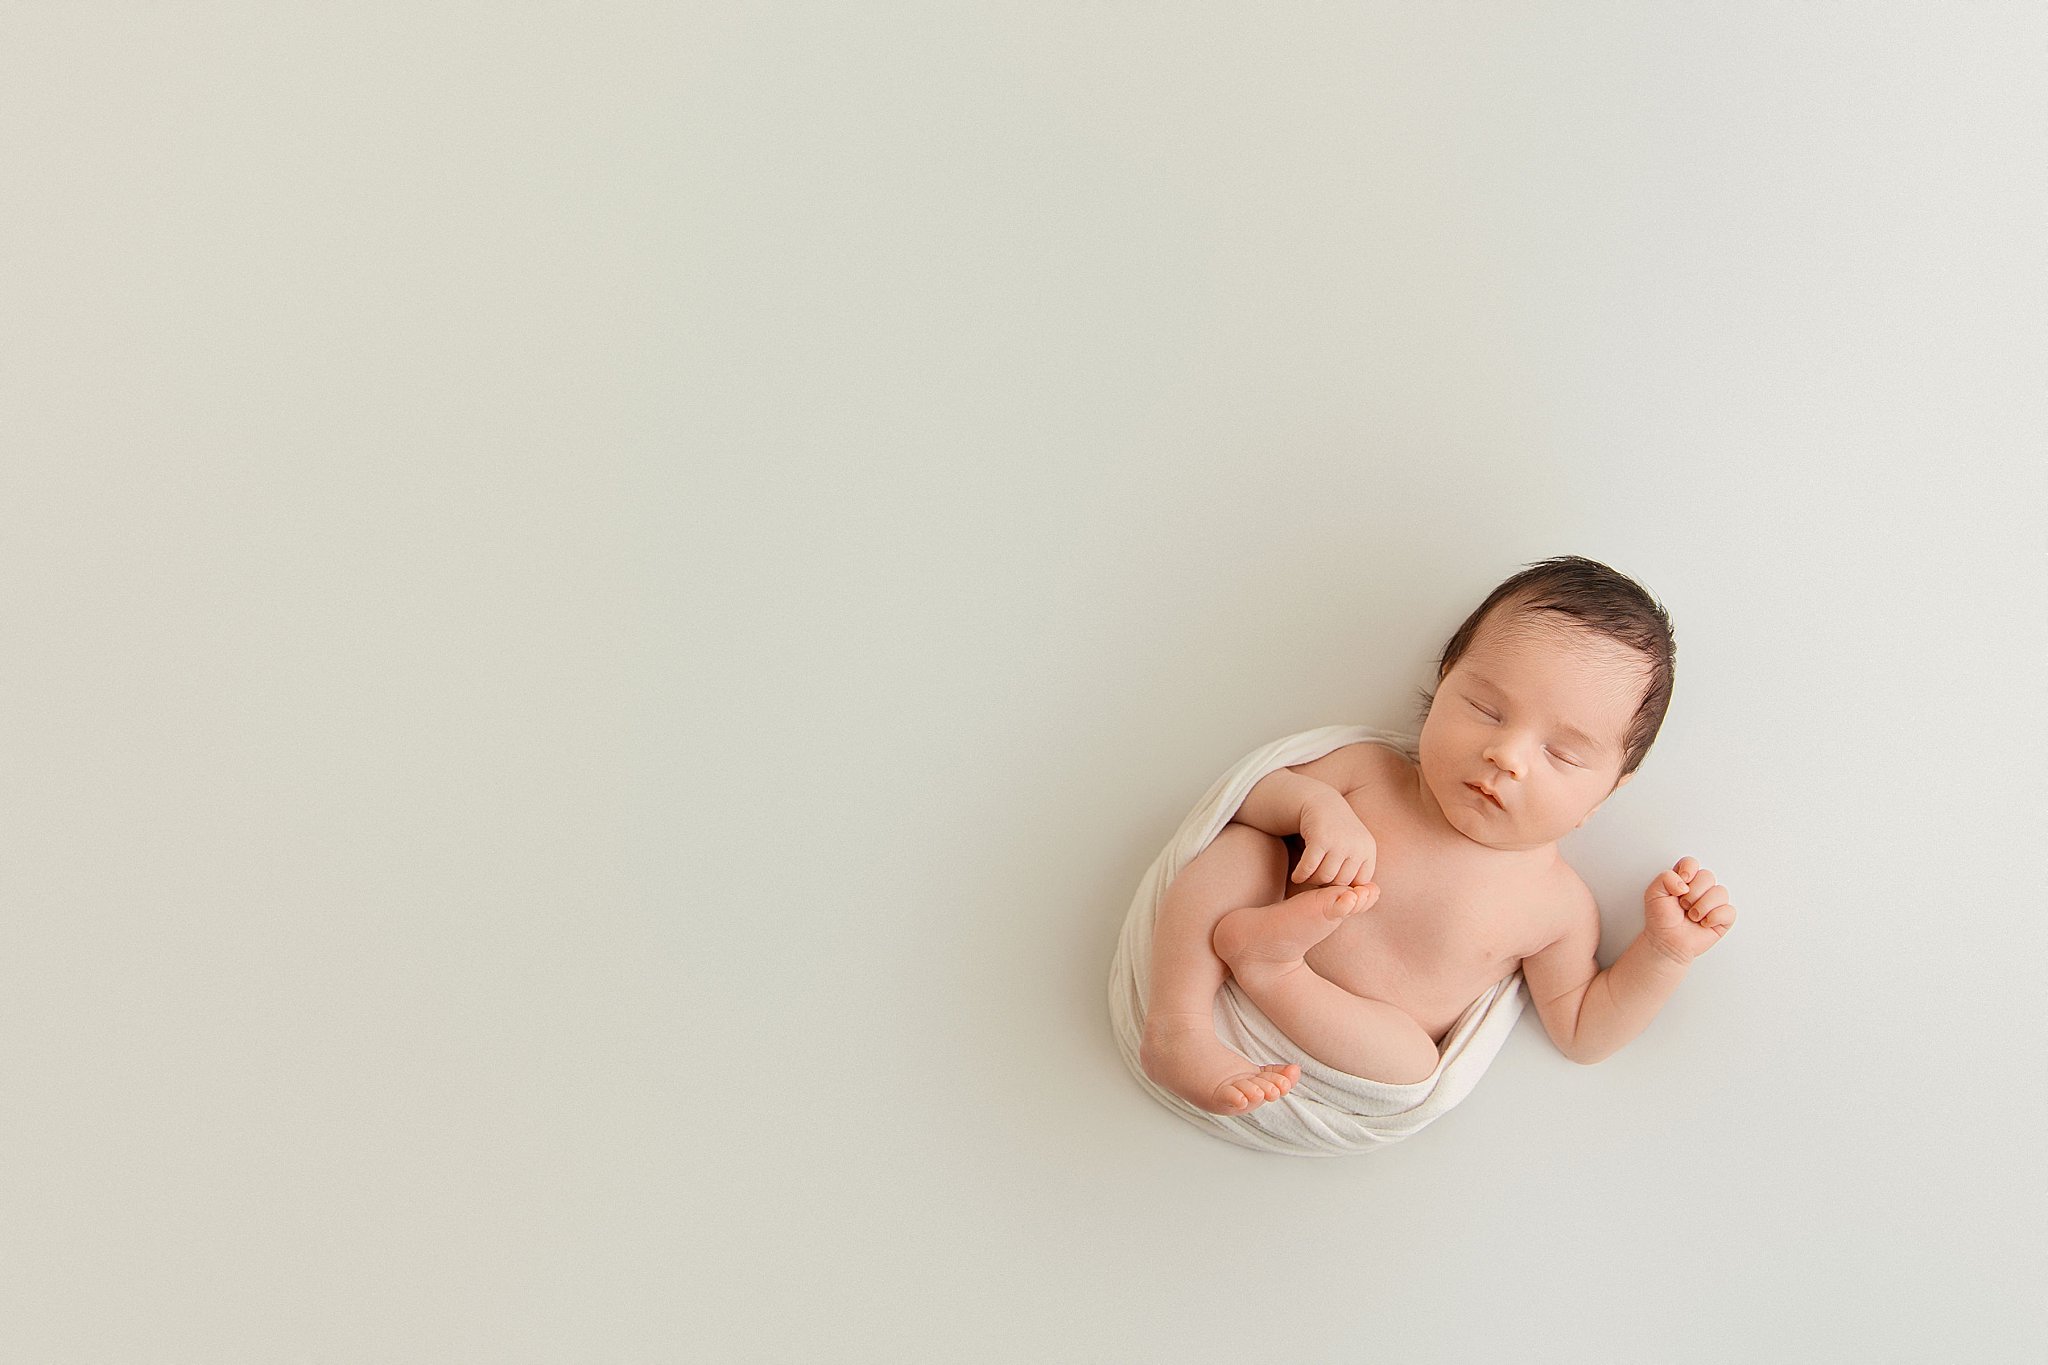 infant is wrapped in white and lays with arms and legs hanging out by Charlottesville photographer